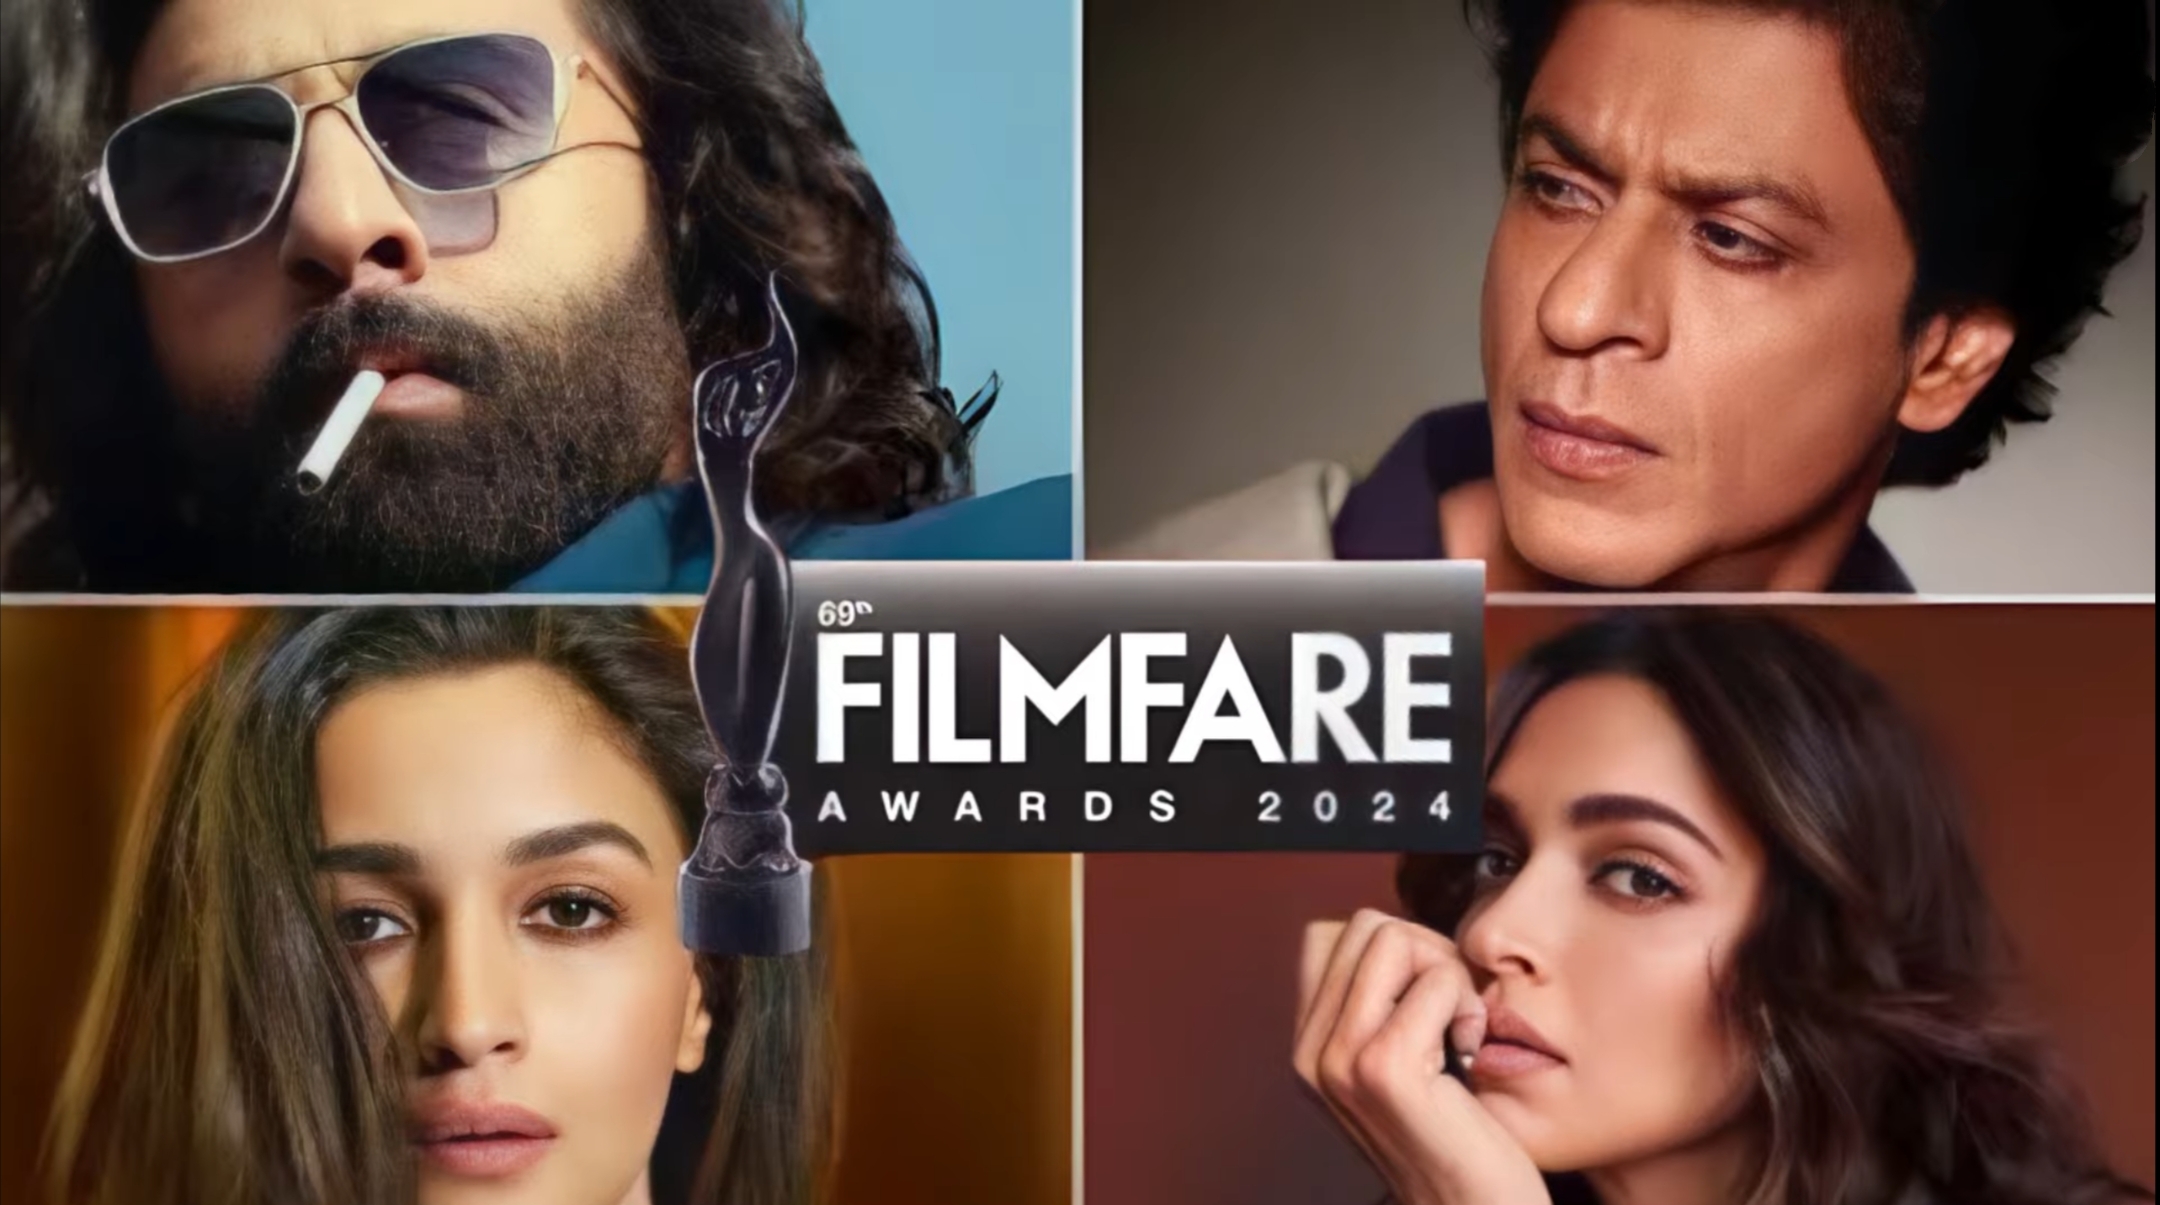 The nominations list for the 69th Filmfare Awards 2024 is out.